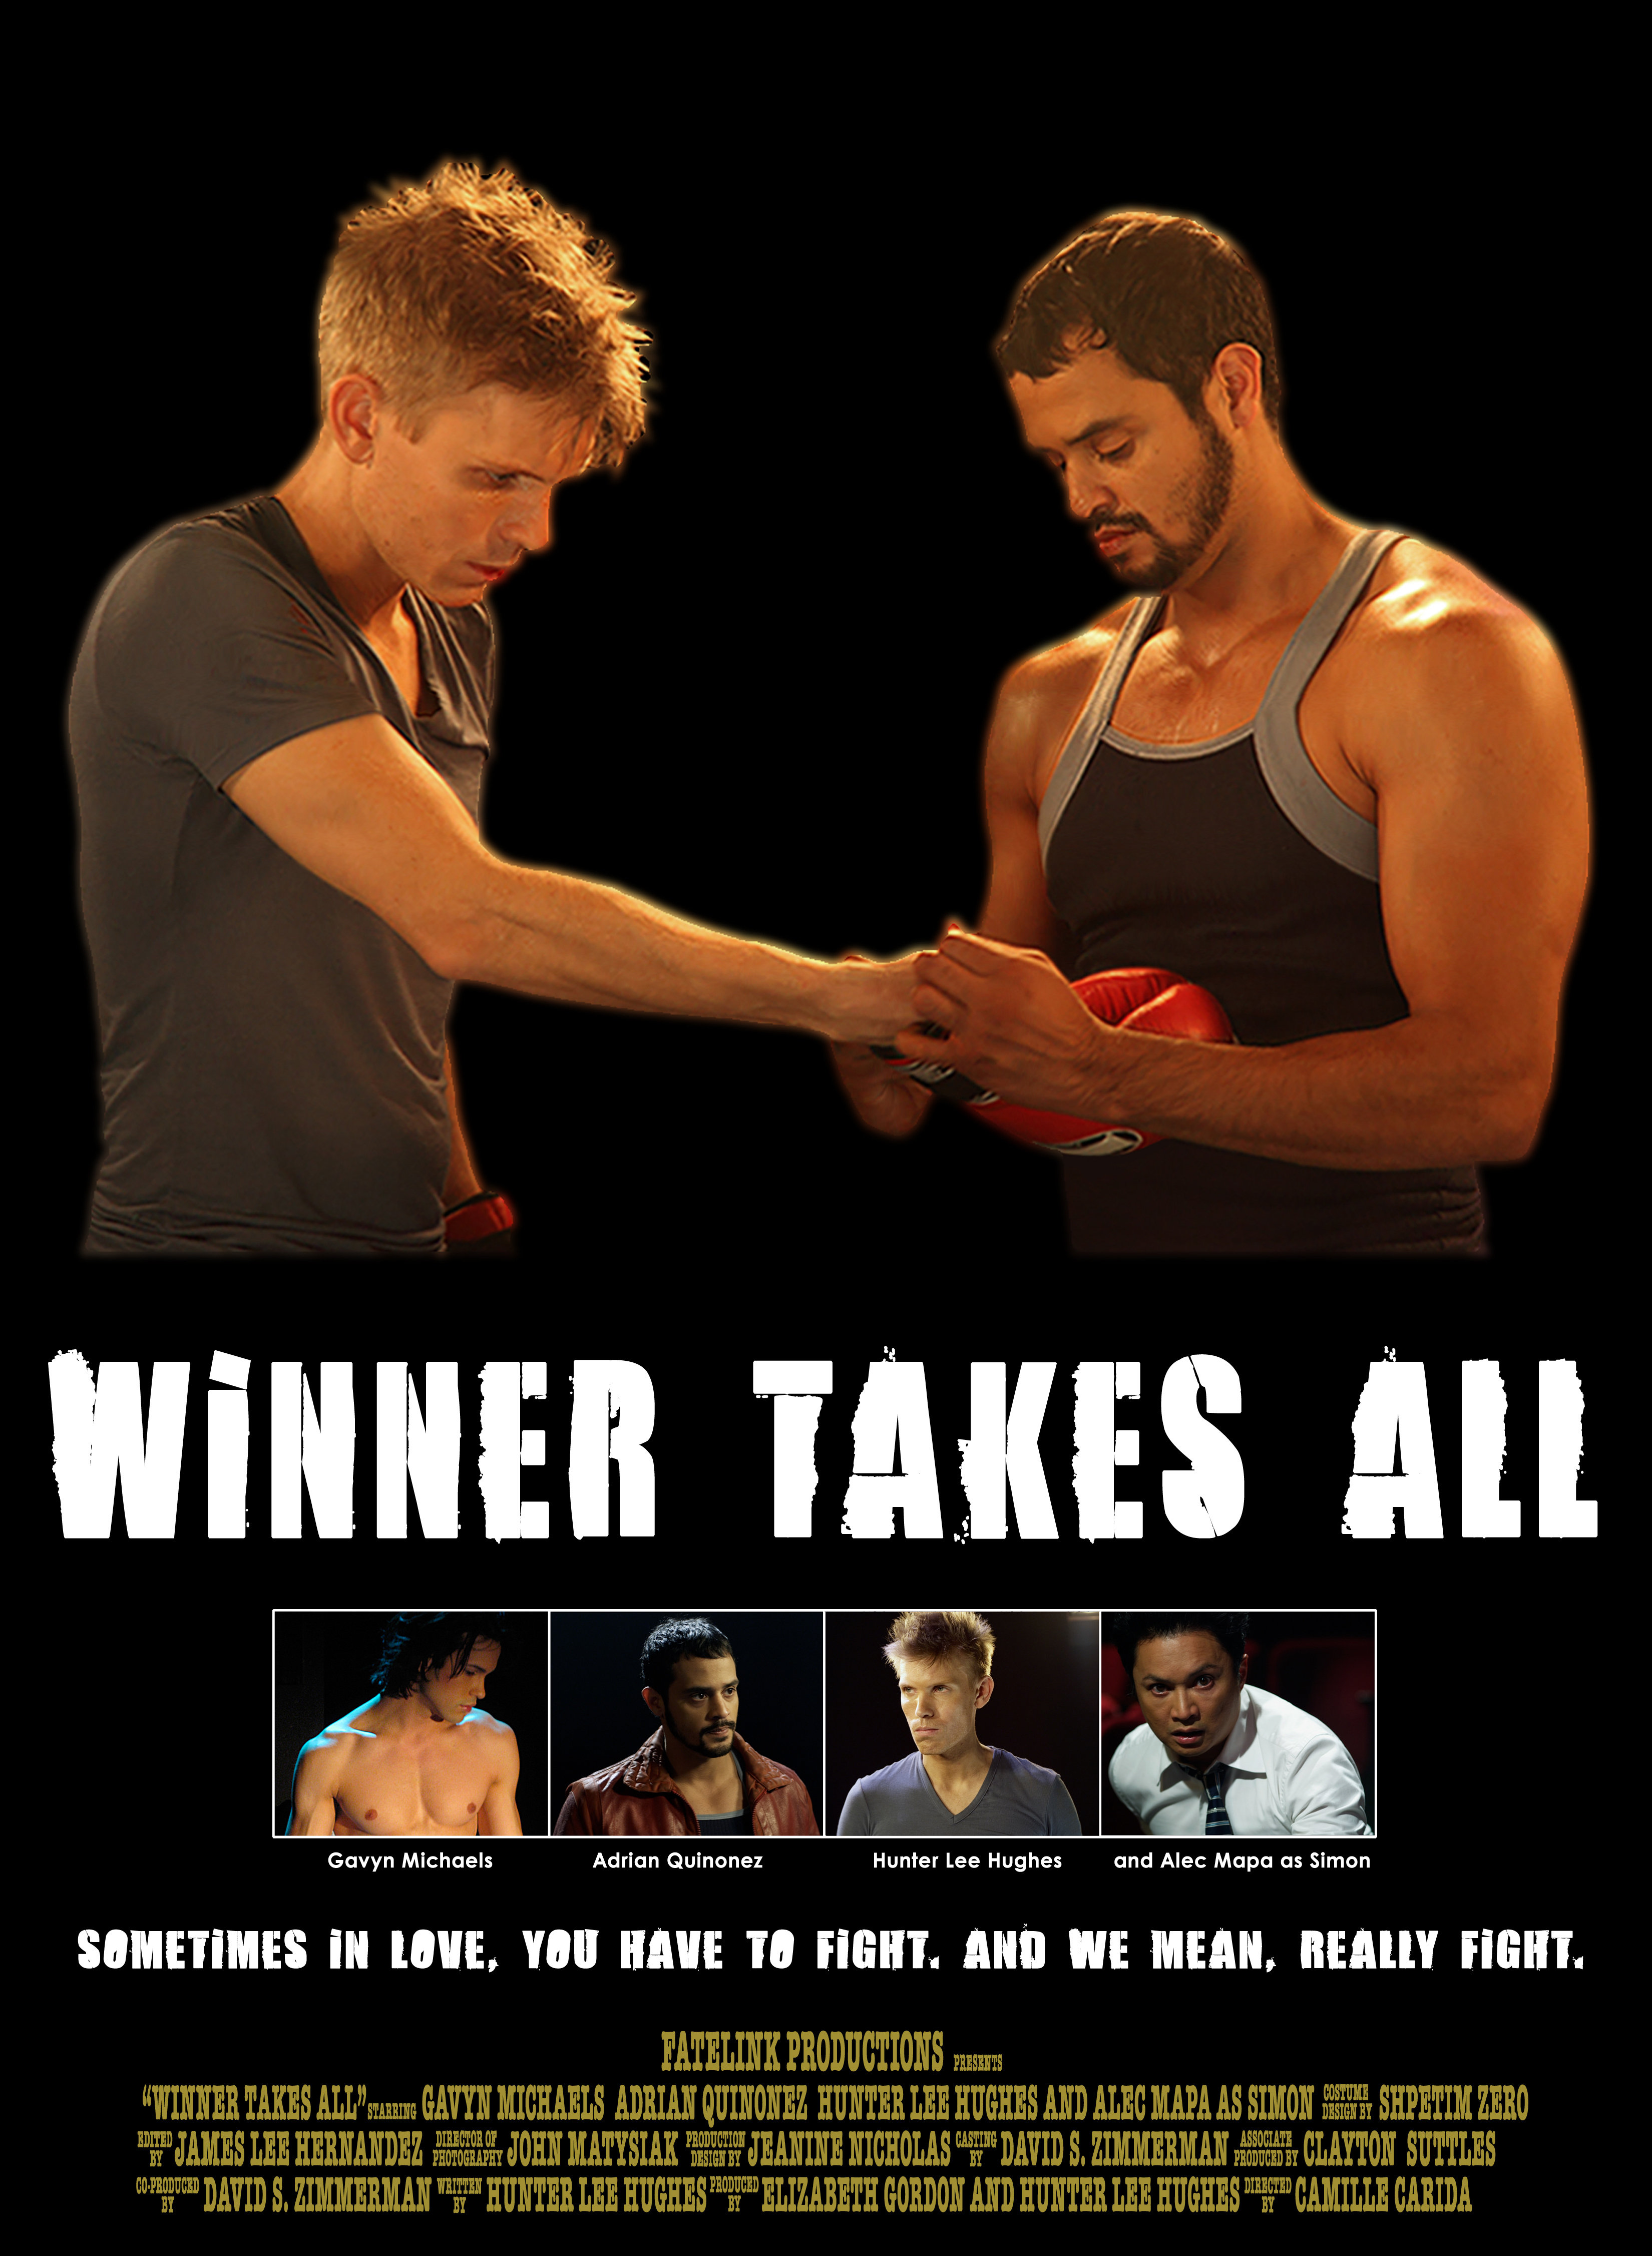 Winner Takes All; Directed by Camille Carida, Written by Hunter Lee Hughes, Produced by Elizabeth Gordon & Hunter Lee Hughes